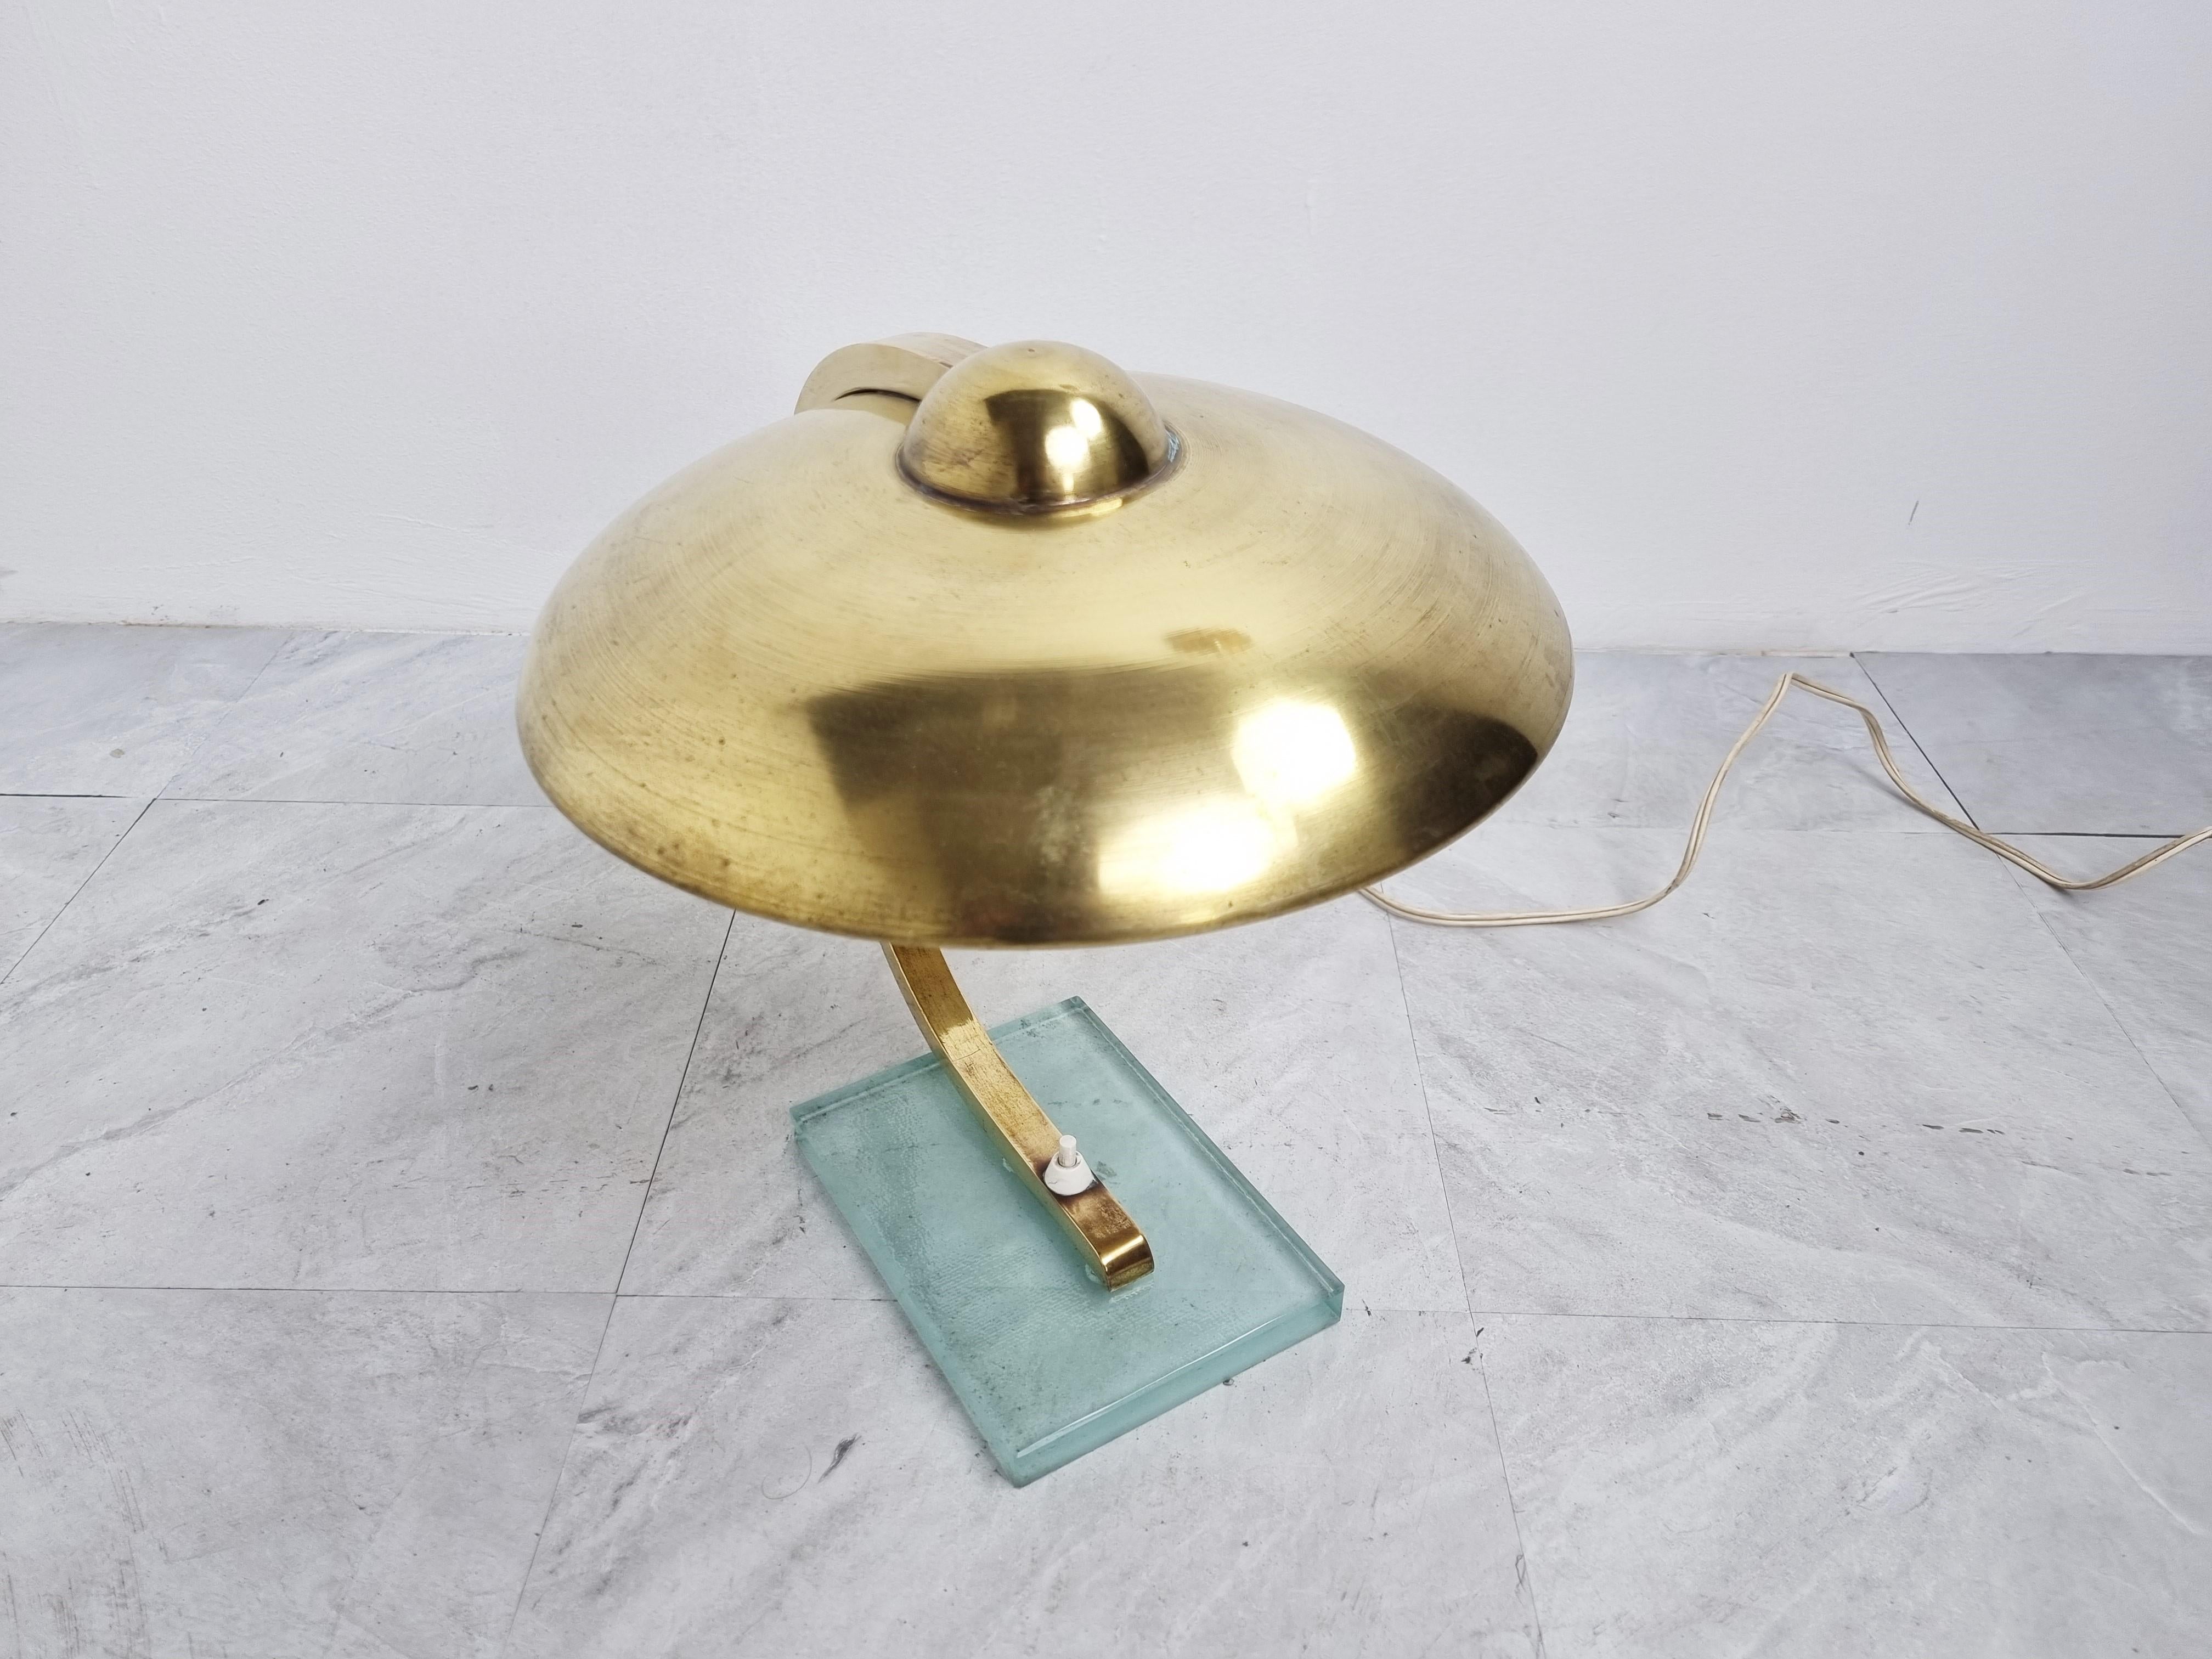 Beautiful original Art Deco/Bauhaus desk lamp made from brass with a glass base.

Typical smart Art Deco design with lovely patinated brass.

It works on 220 as well as 110v. 

Measures: Height: 33cm/12.99